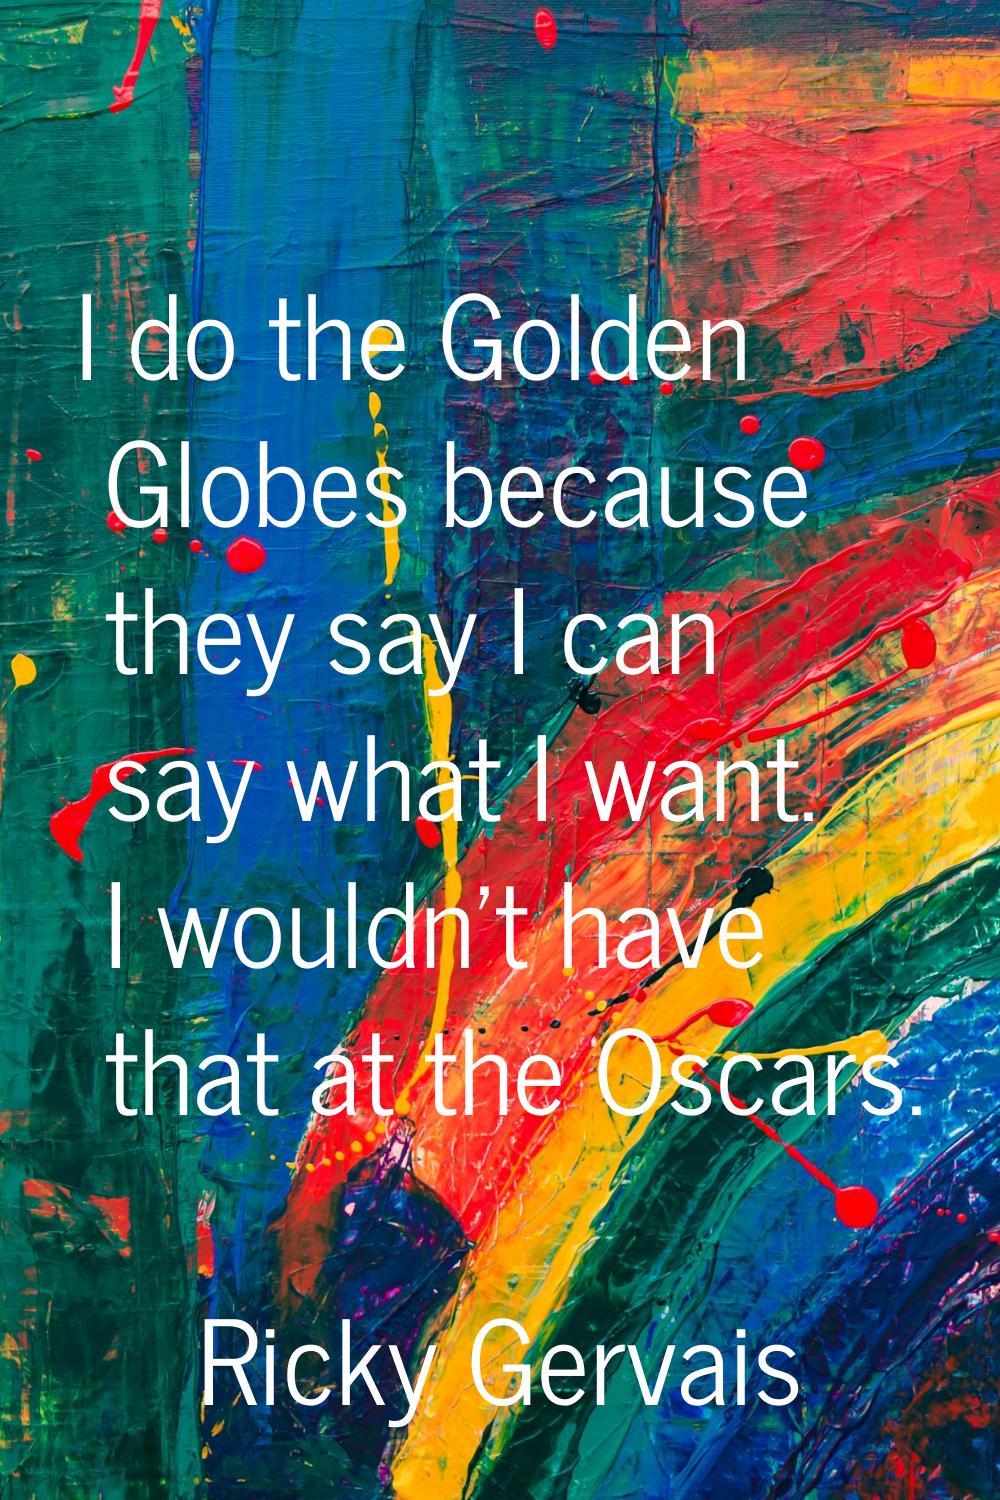 I do the Golden Globes because they say I can say what I want. I wouldn't have that at the Oscars.